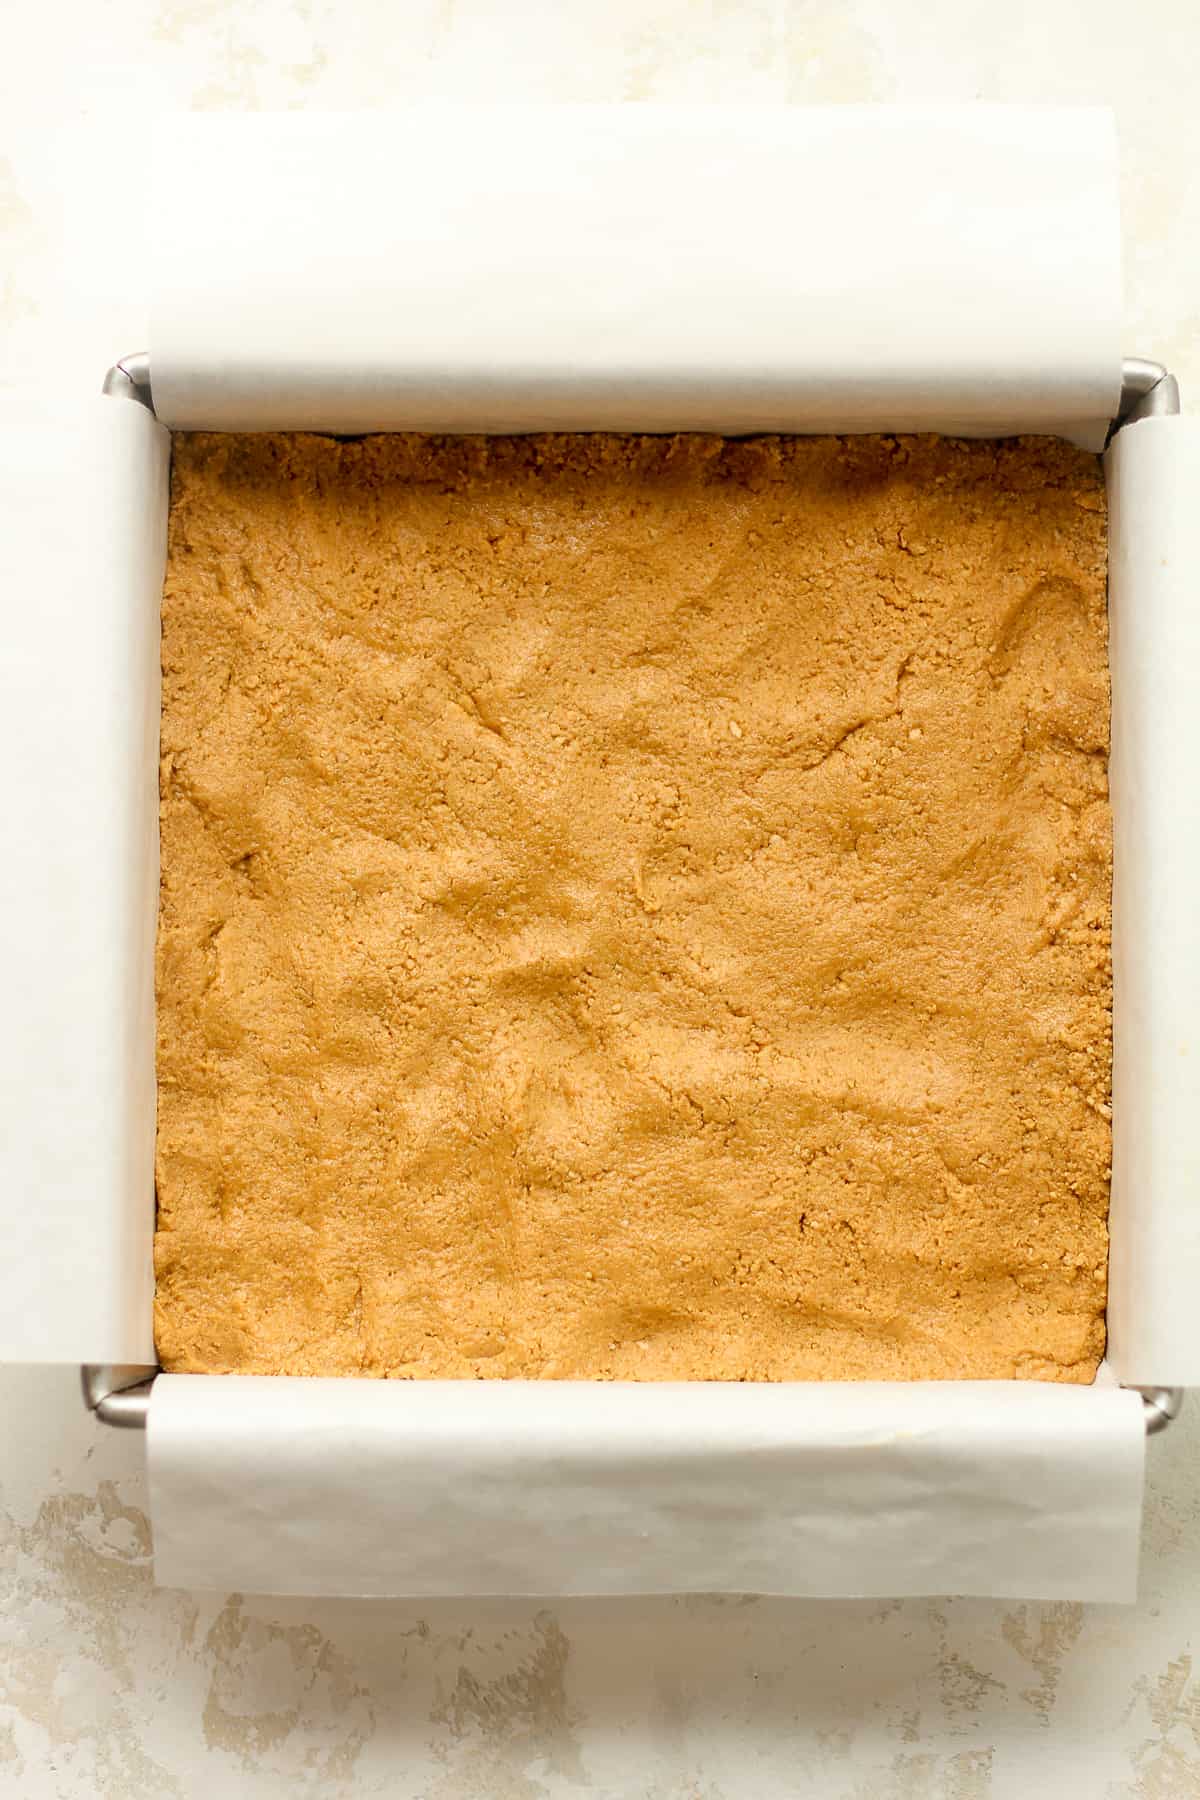 The pressed peanut butter mixture in a square pan.